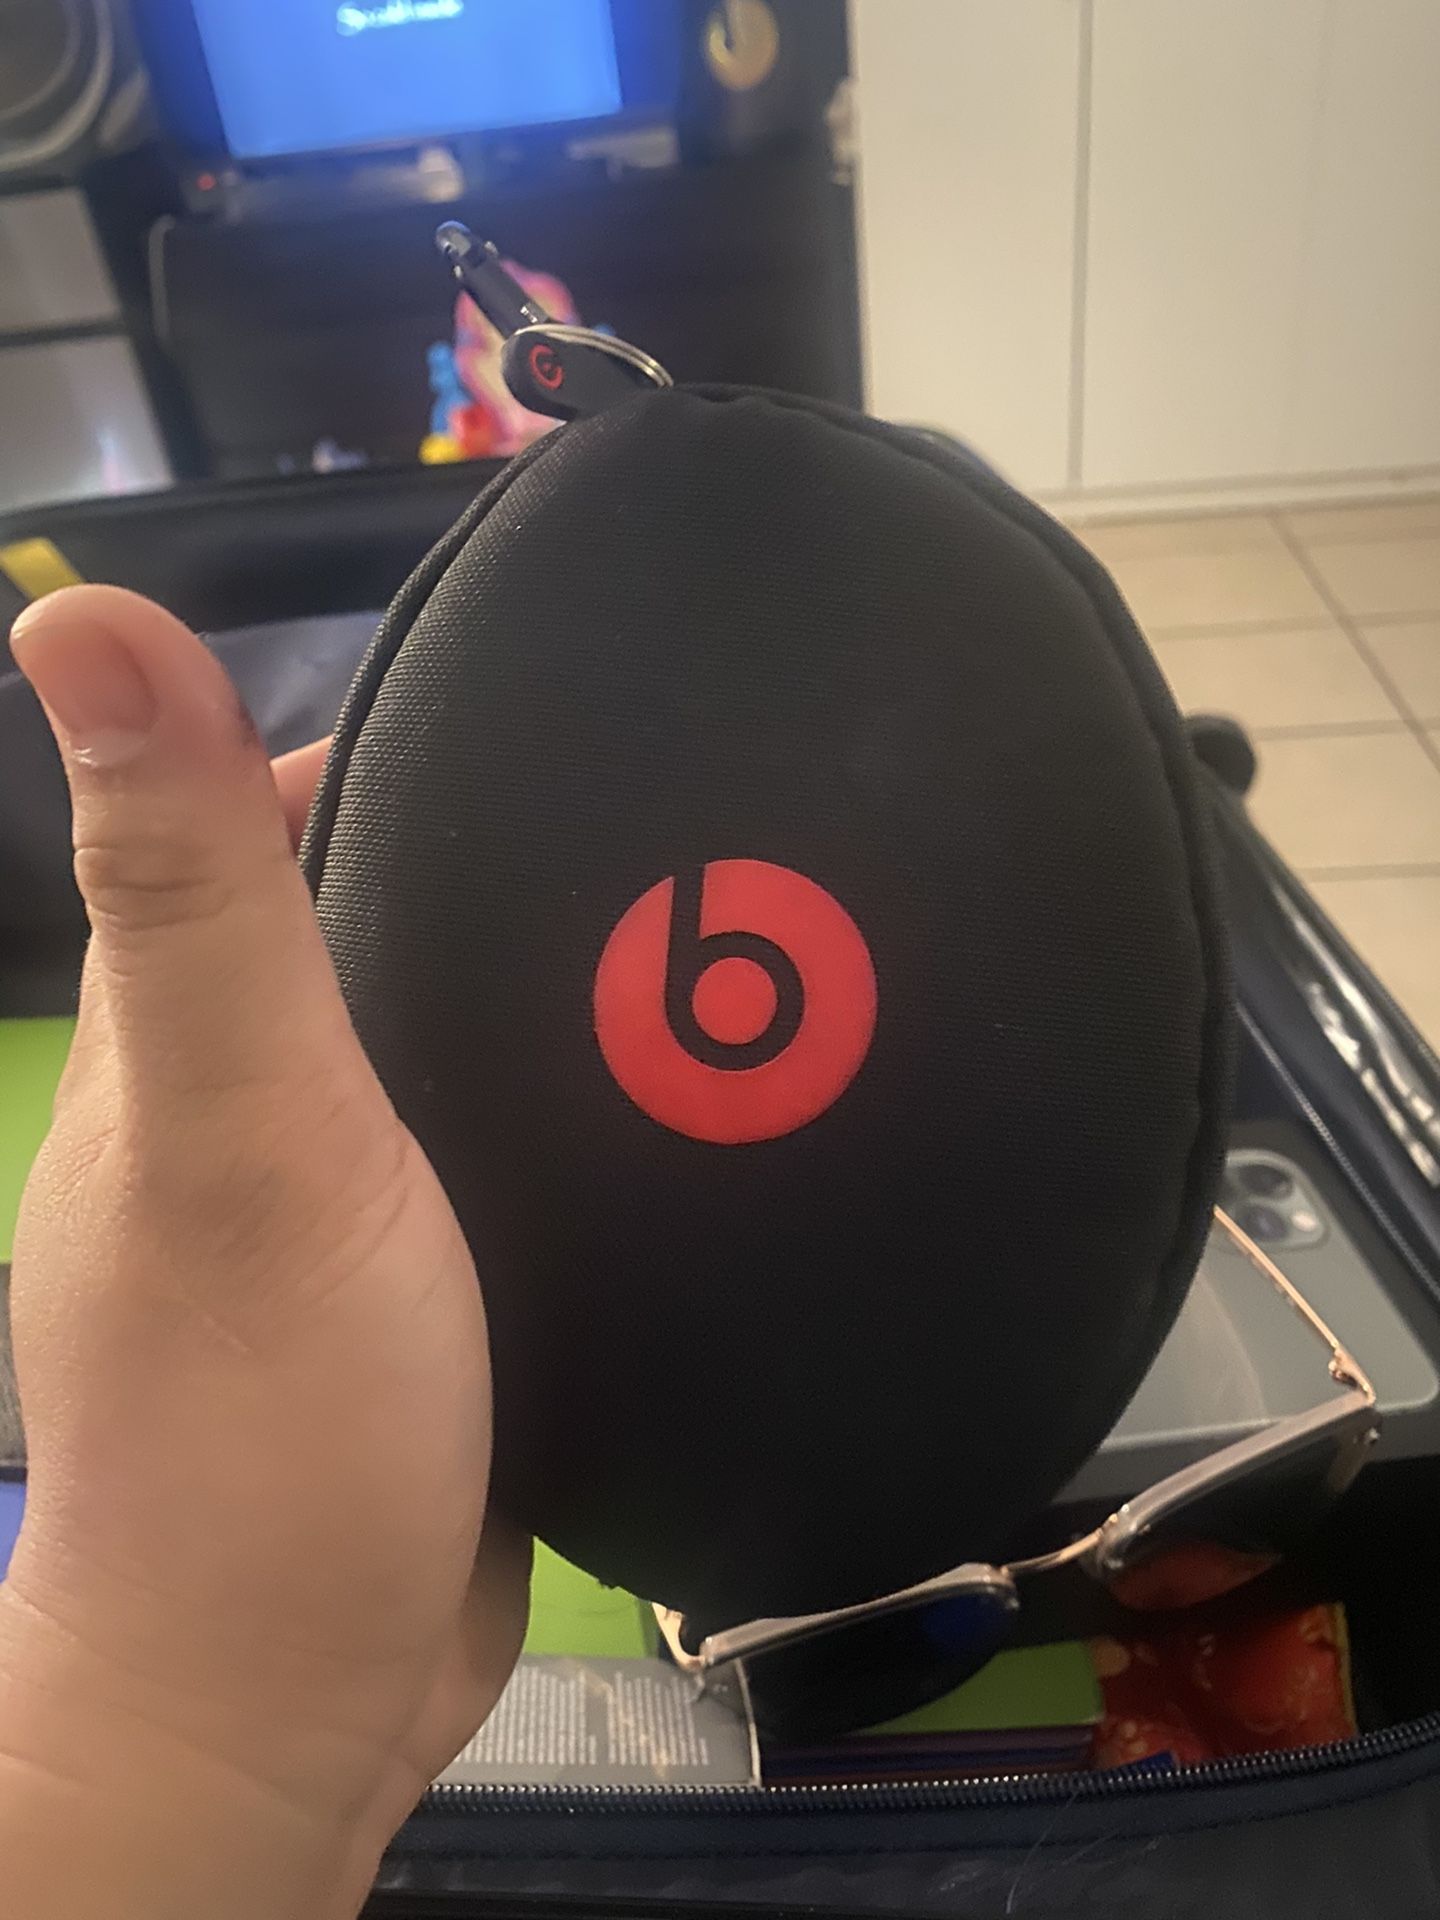 Beat solo wireless almost new! First owner